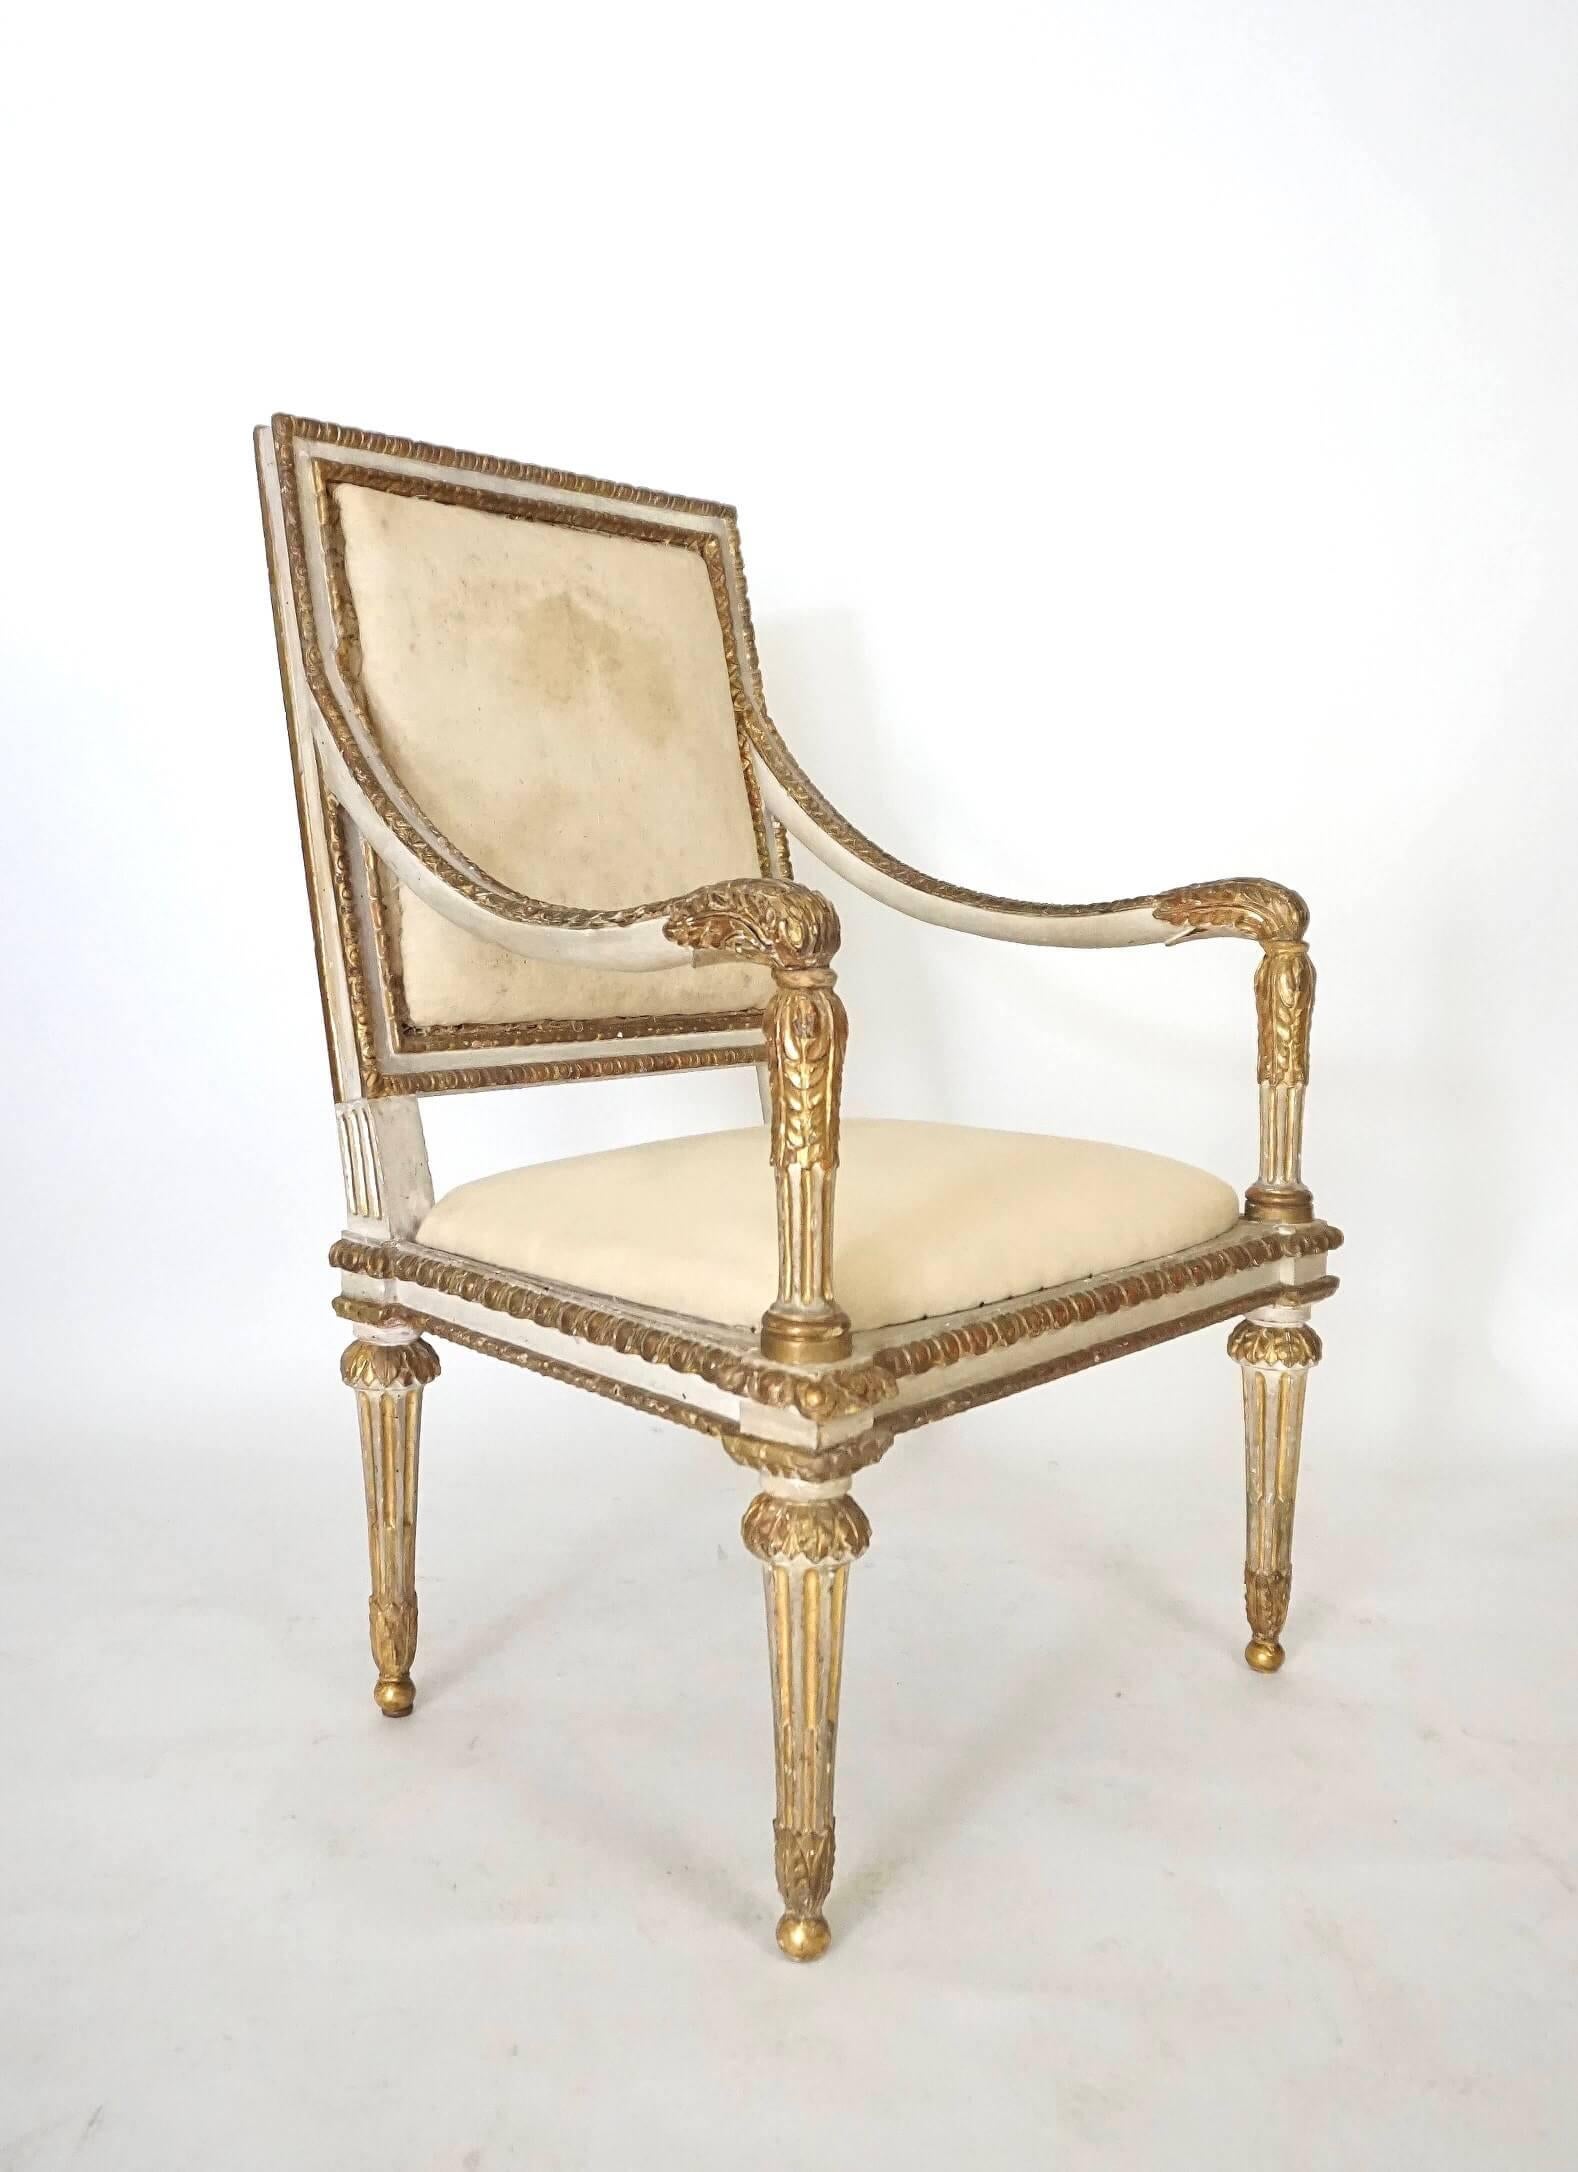 Italian Louis XVI Painted and Parcel Gilt Fauteuil of Large Scale, circa 1780 For Sale 7